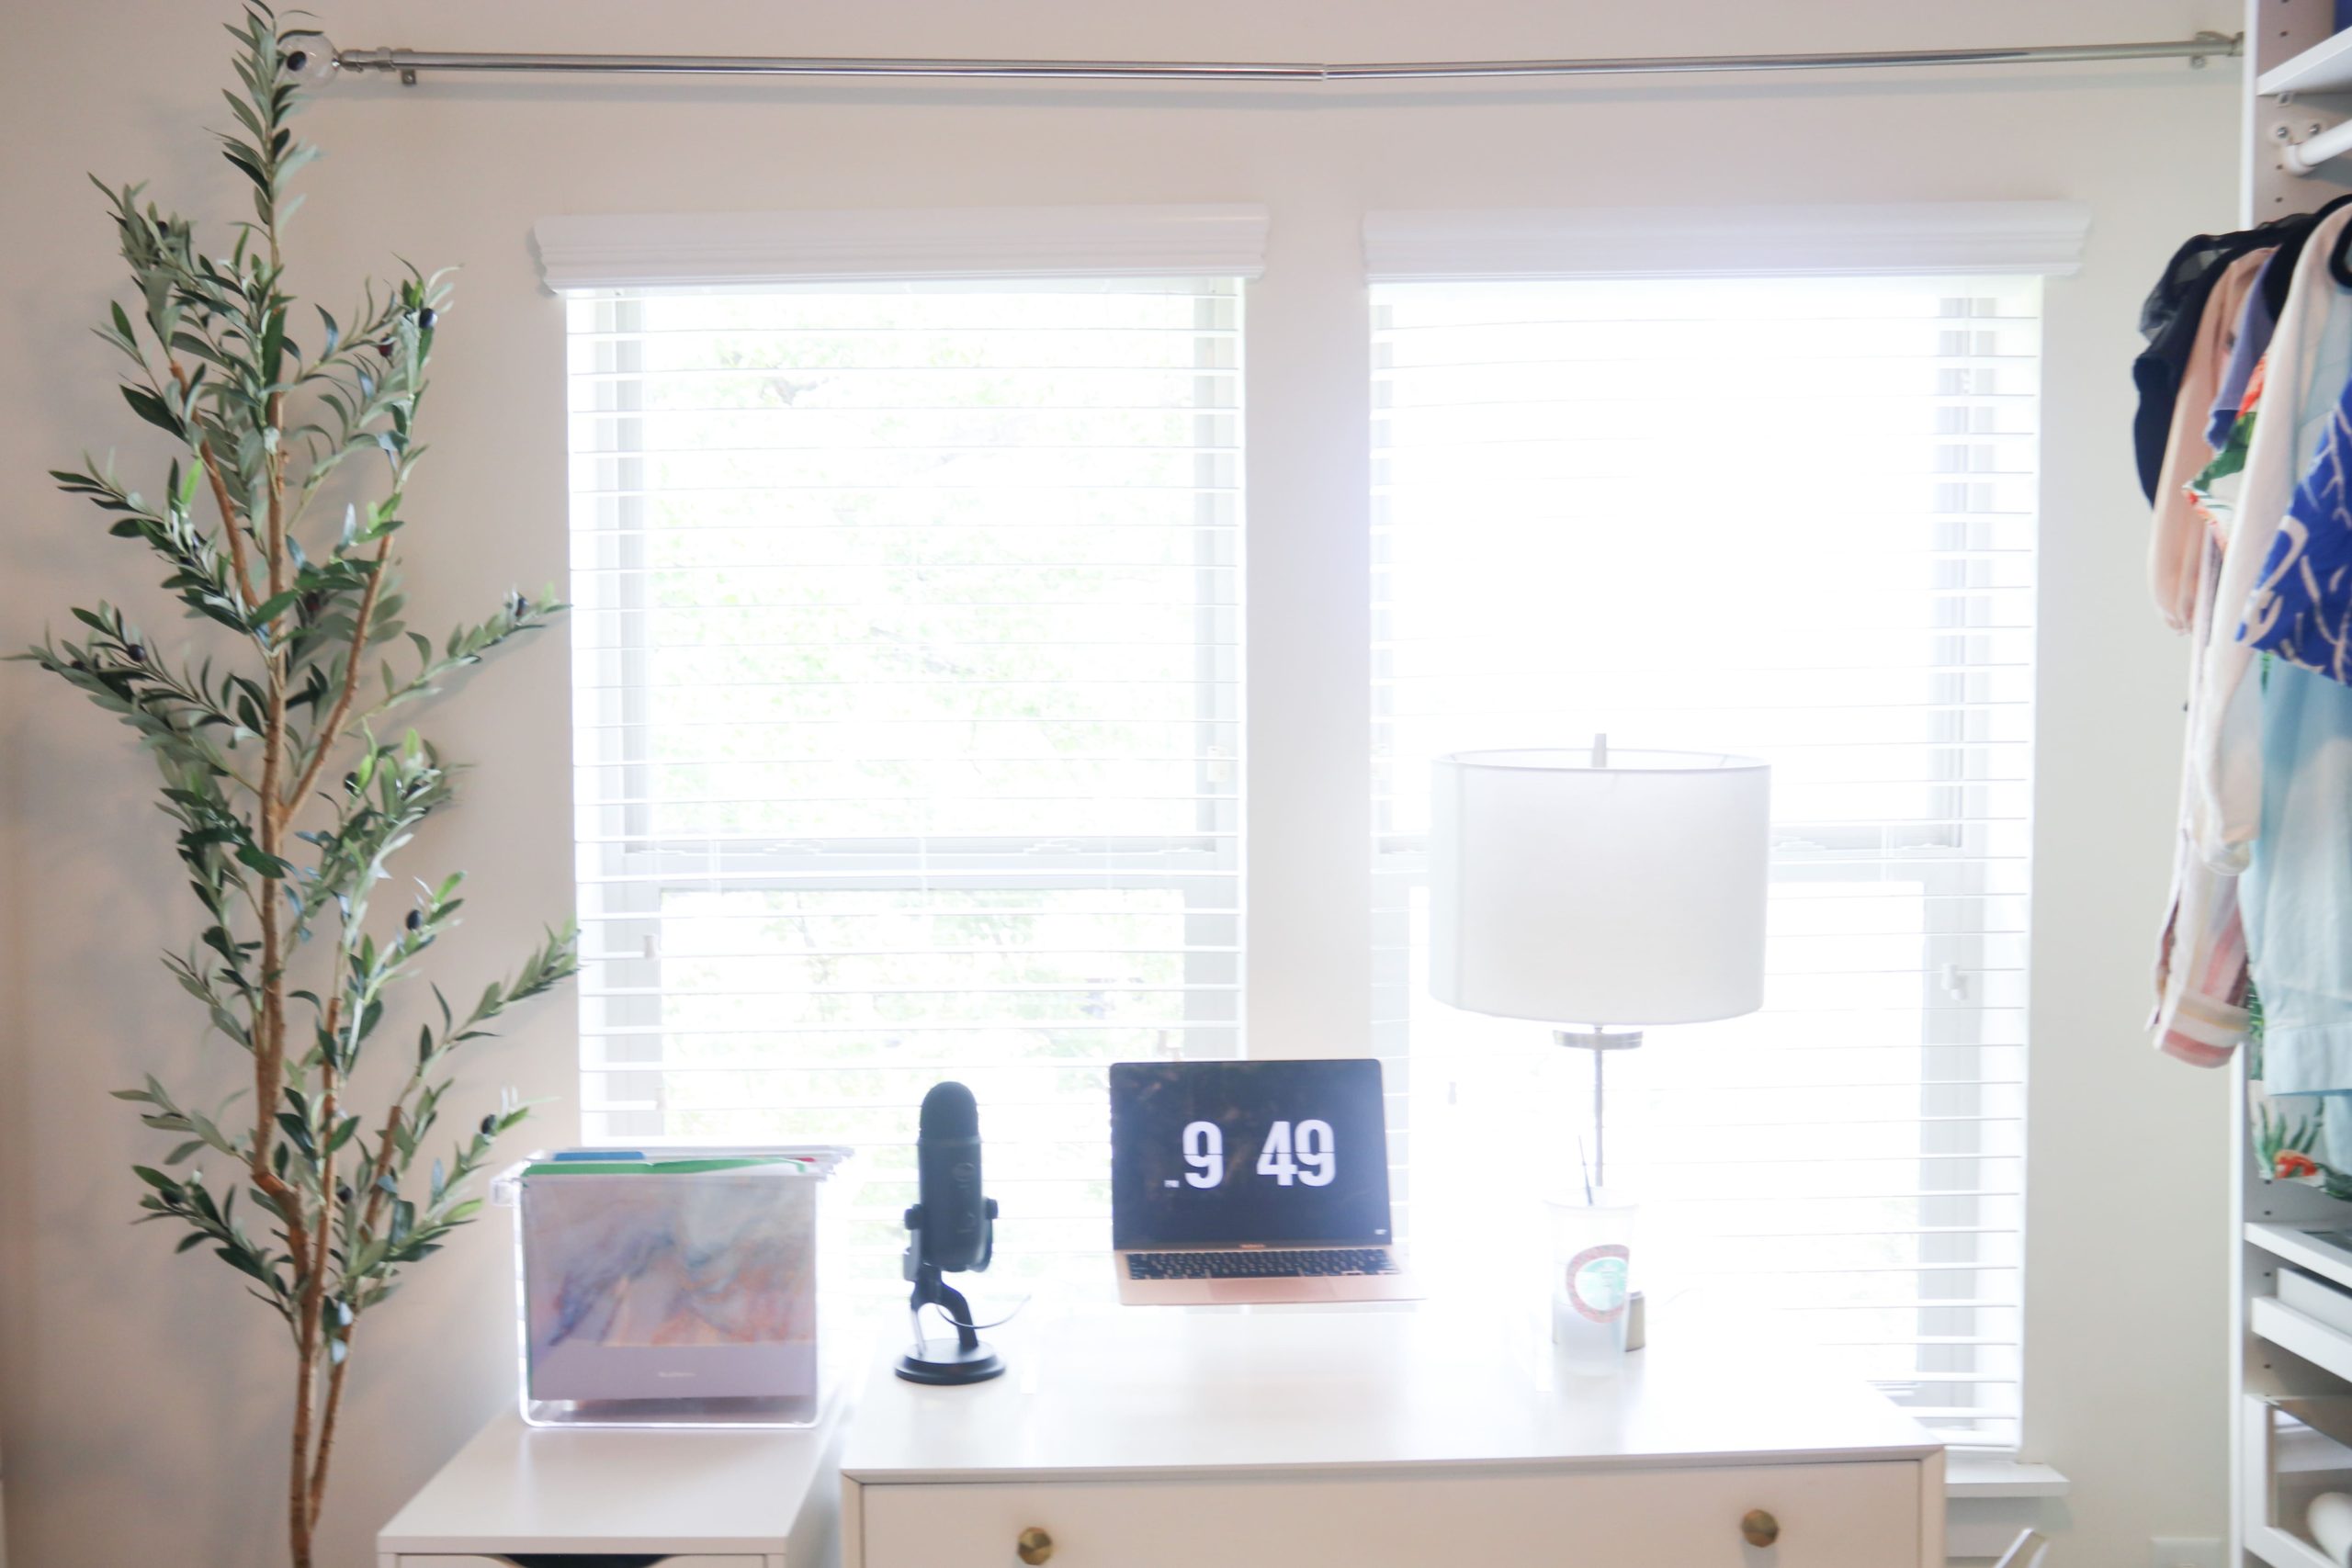 home office with qvc home office items such as lamp